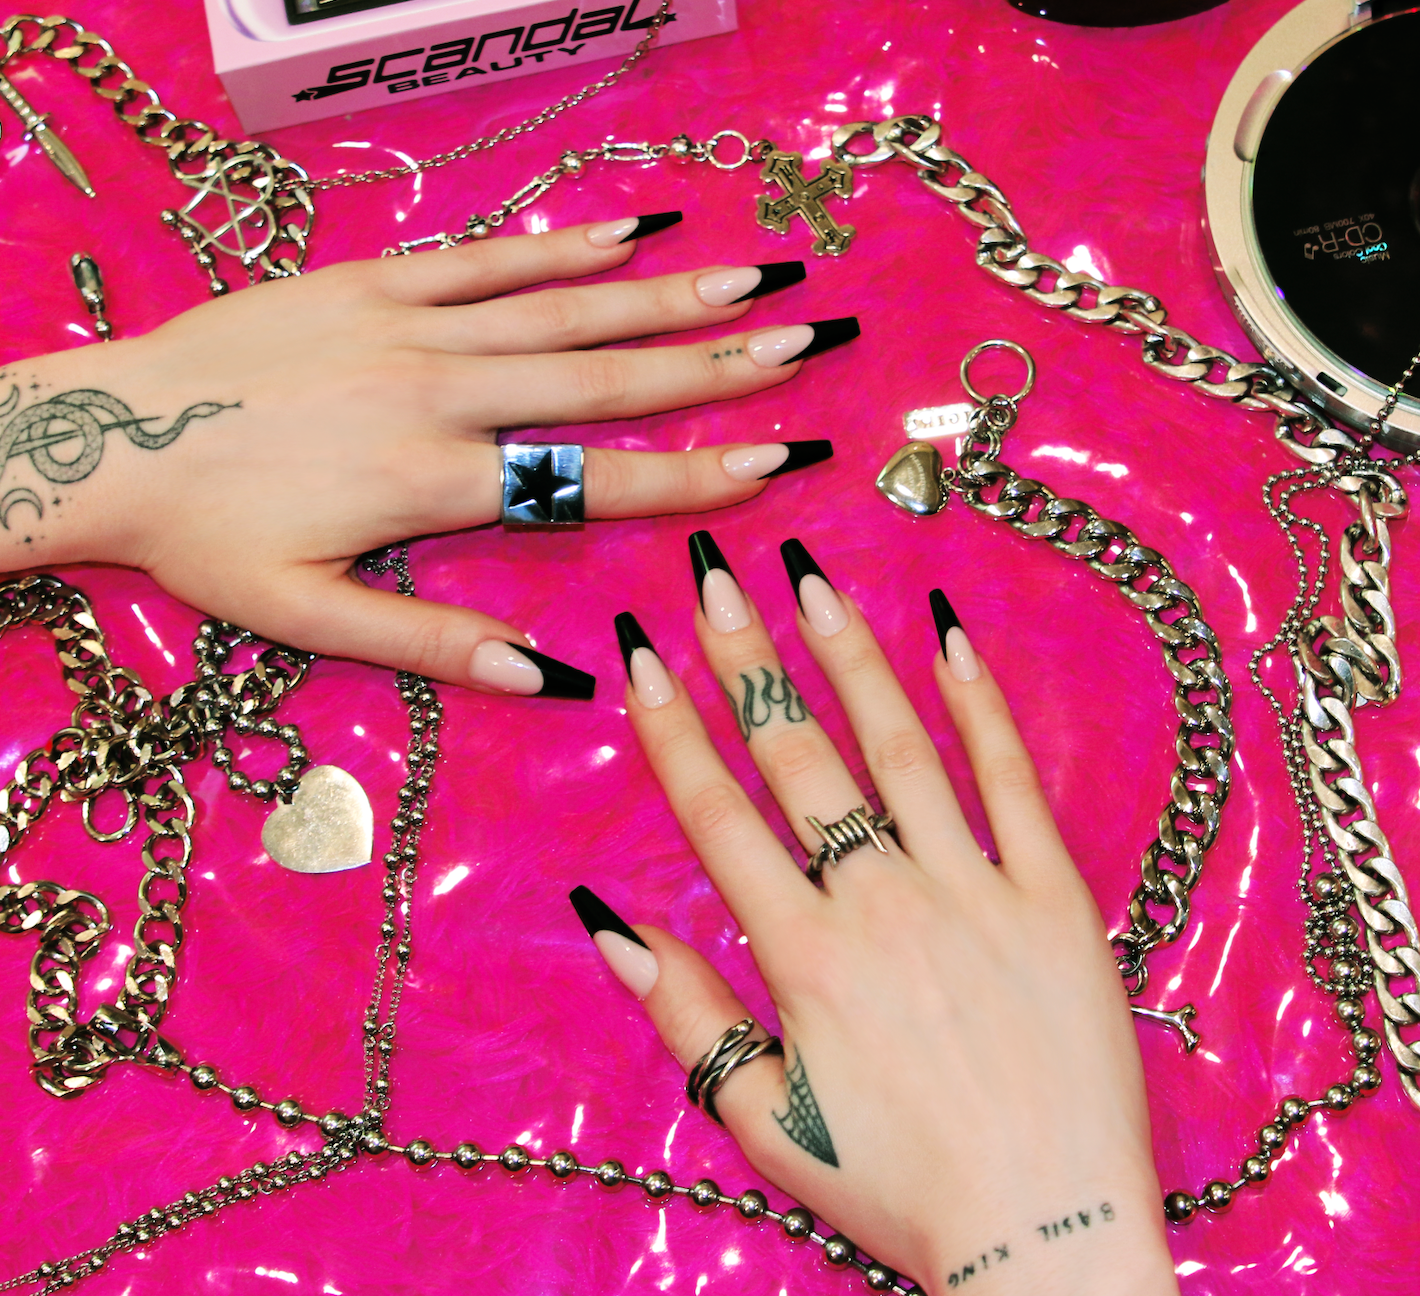 Two hands wearing black French tip nails surrounded by 2000's alternative era inspired silver metal jewelry chains, featuring a CD player. On hot pink fur background.